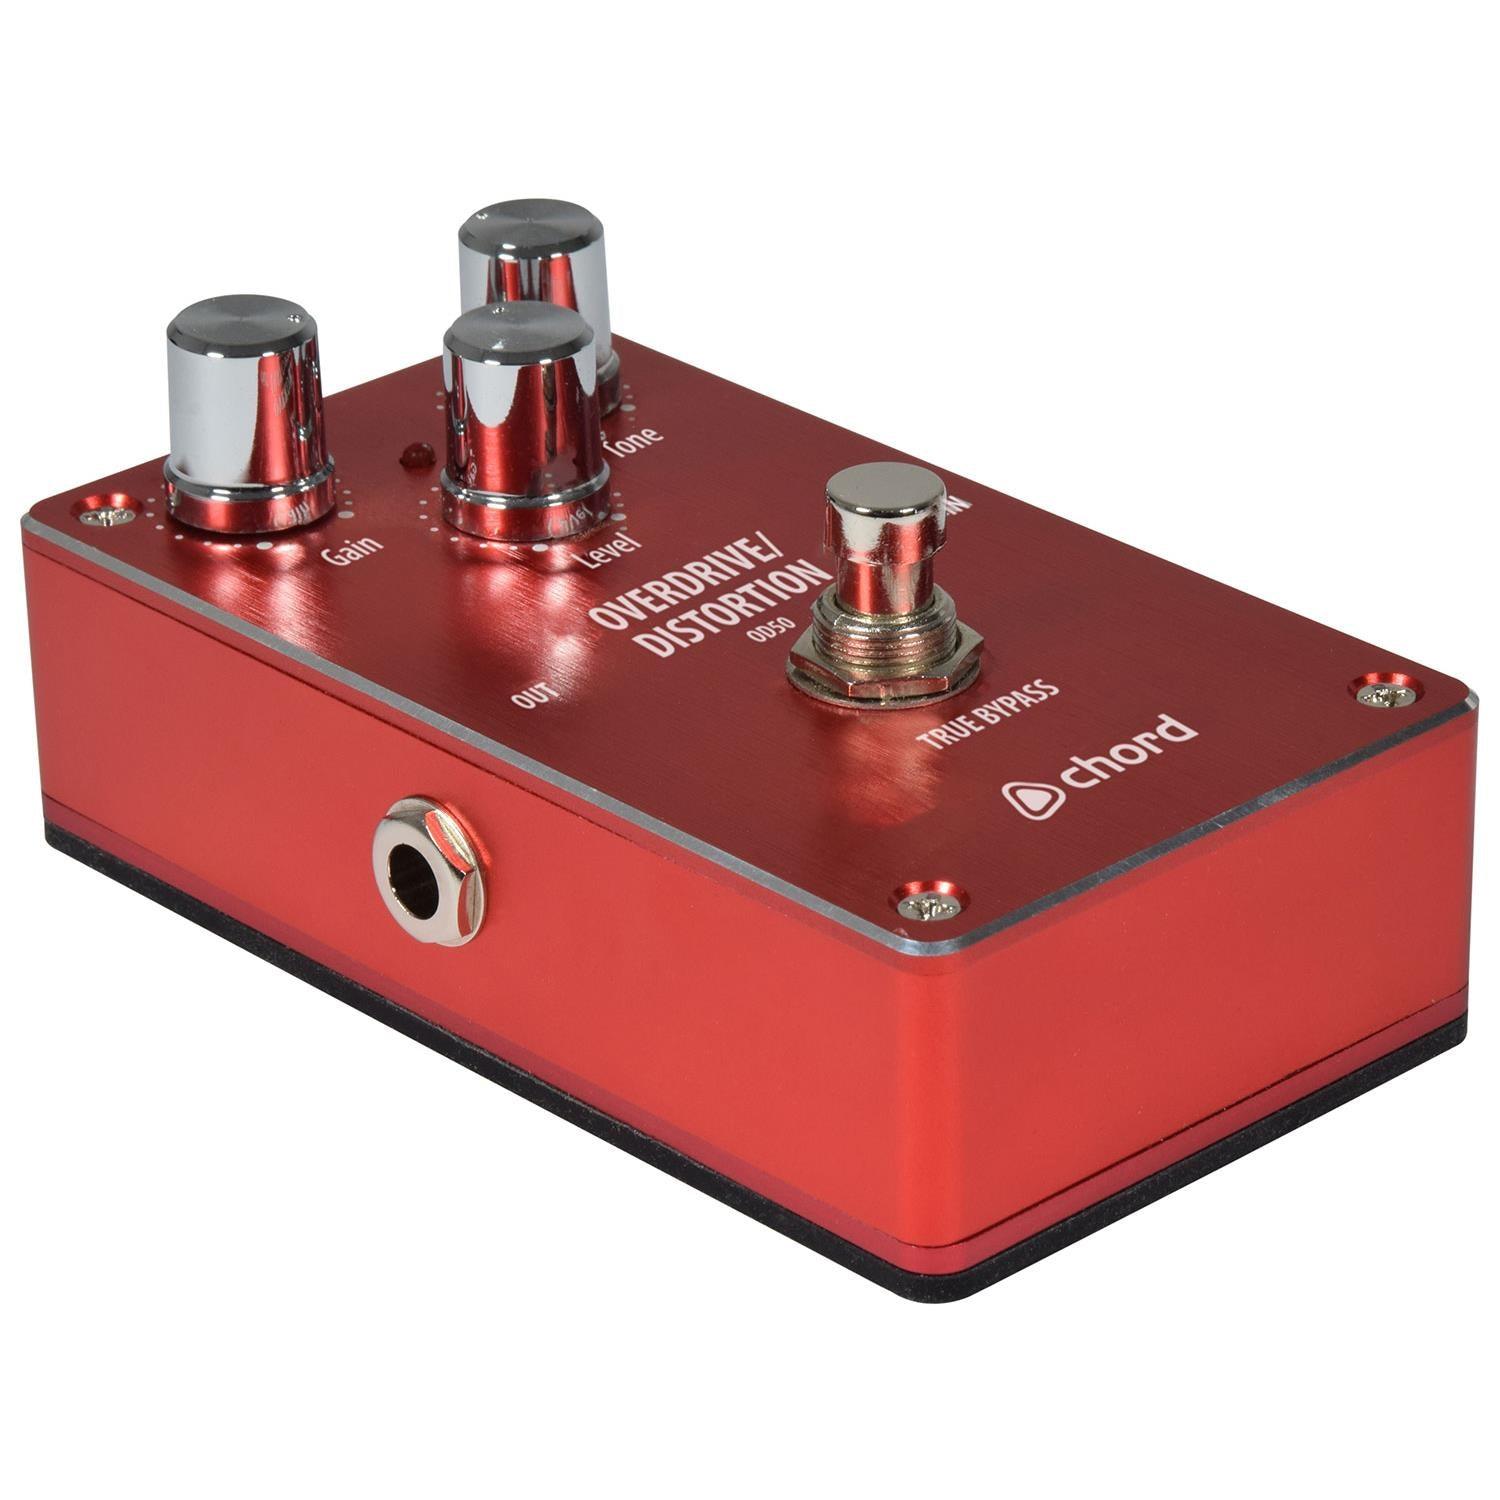 Chord OD-50 Overdrive / Distortion Pedal - DY Pro Audio